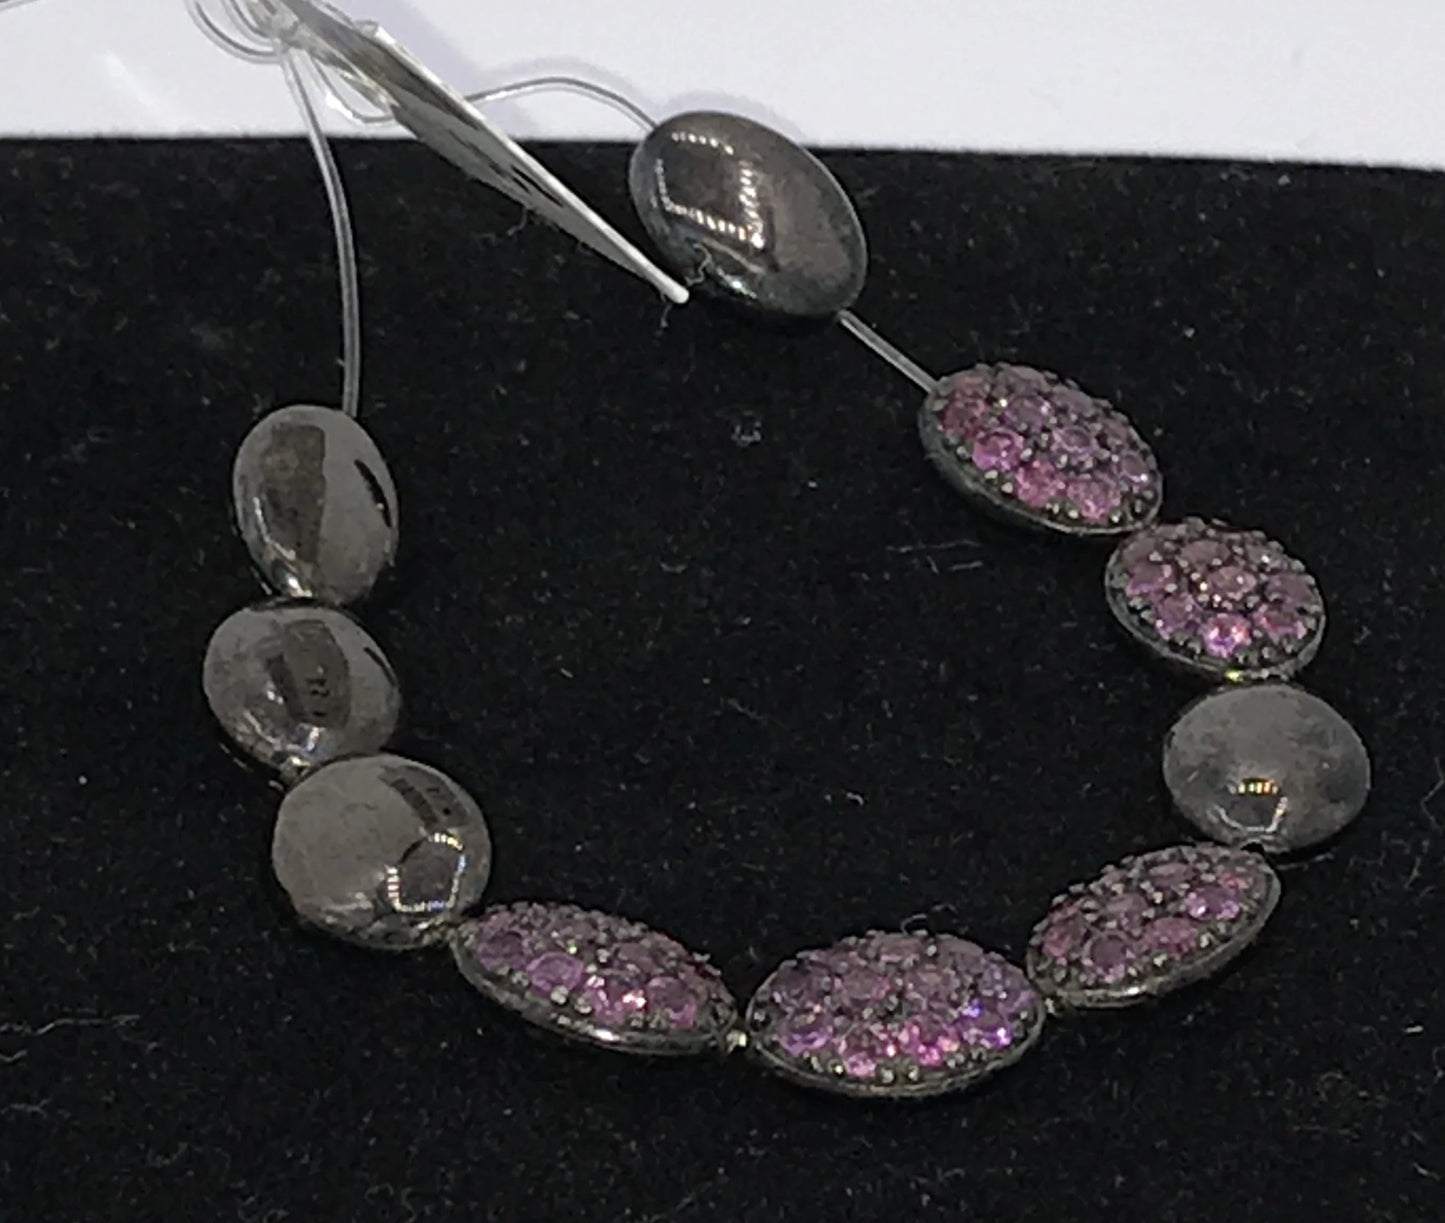 OVAL SHAPE BEADS SET ON STERLING SILVER AND GEMSTONES